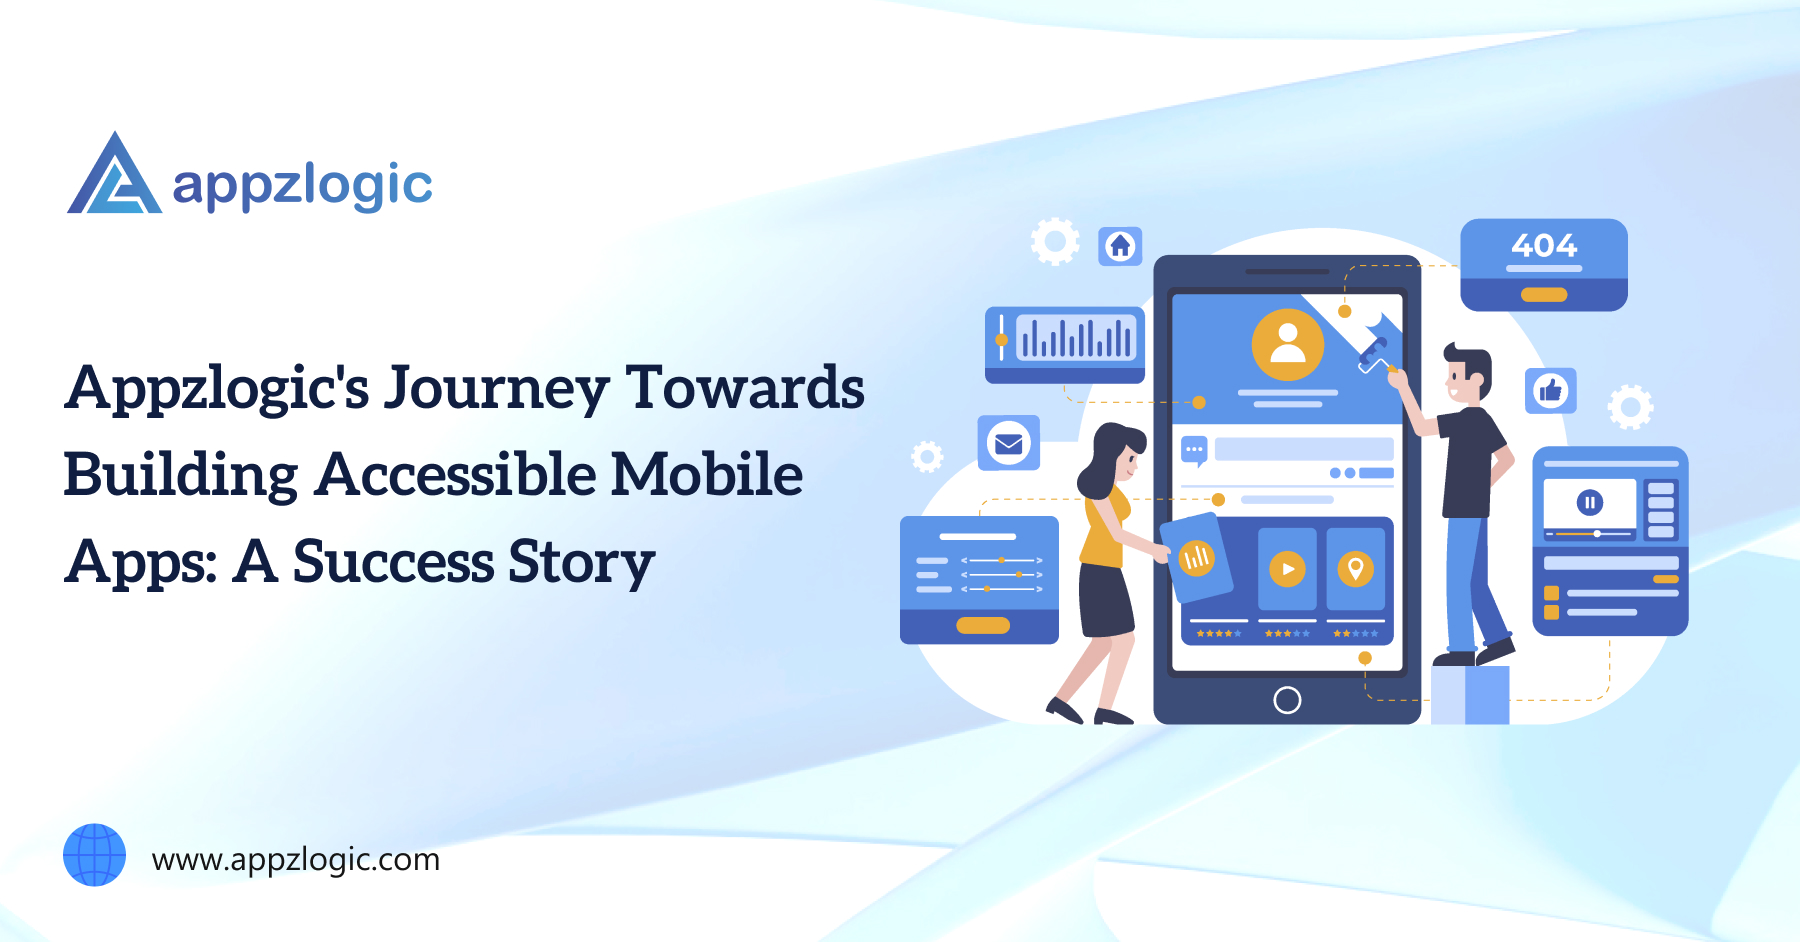 Appzlogic's Journey Towards Building Accessible Mobile Apps_ A Success Story